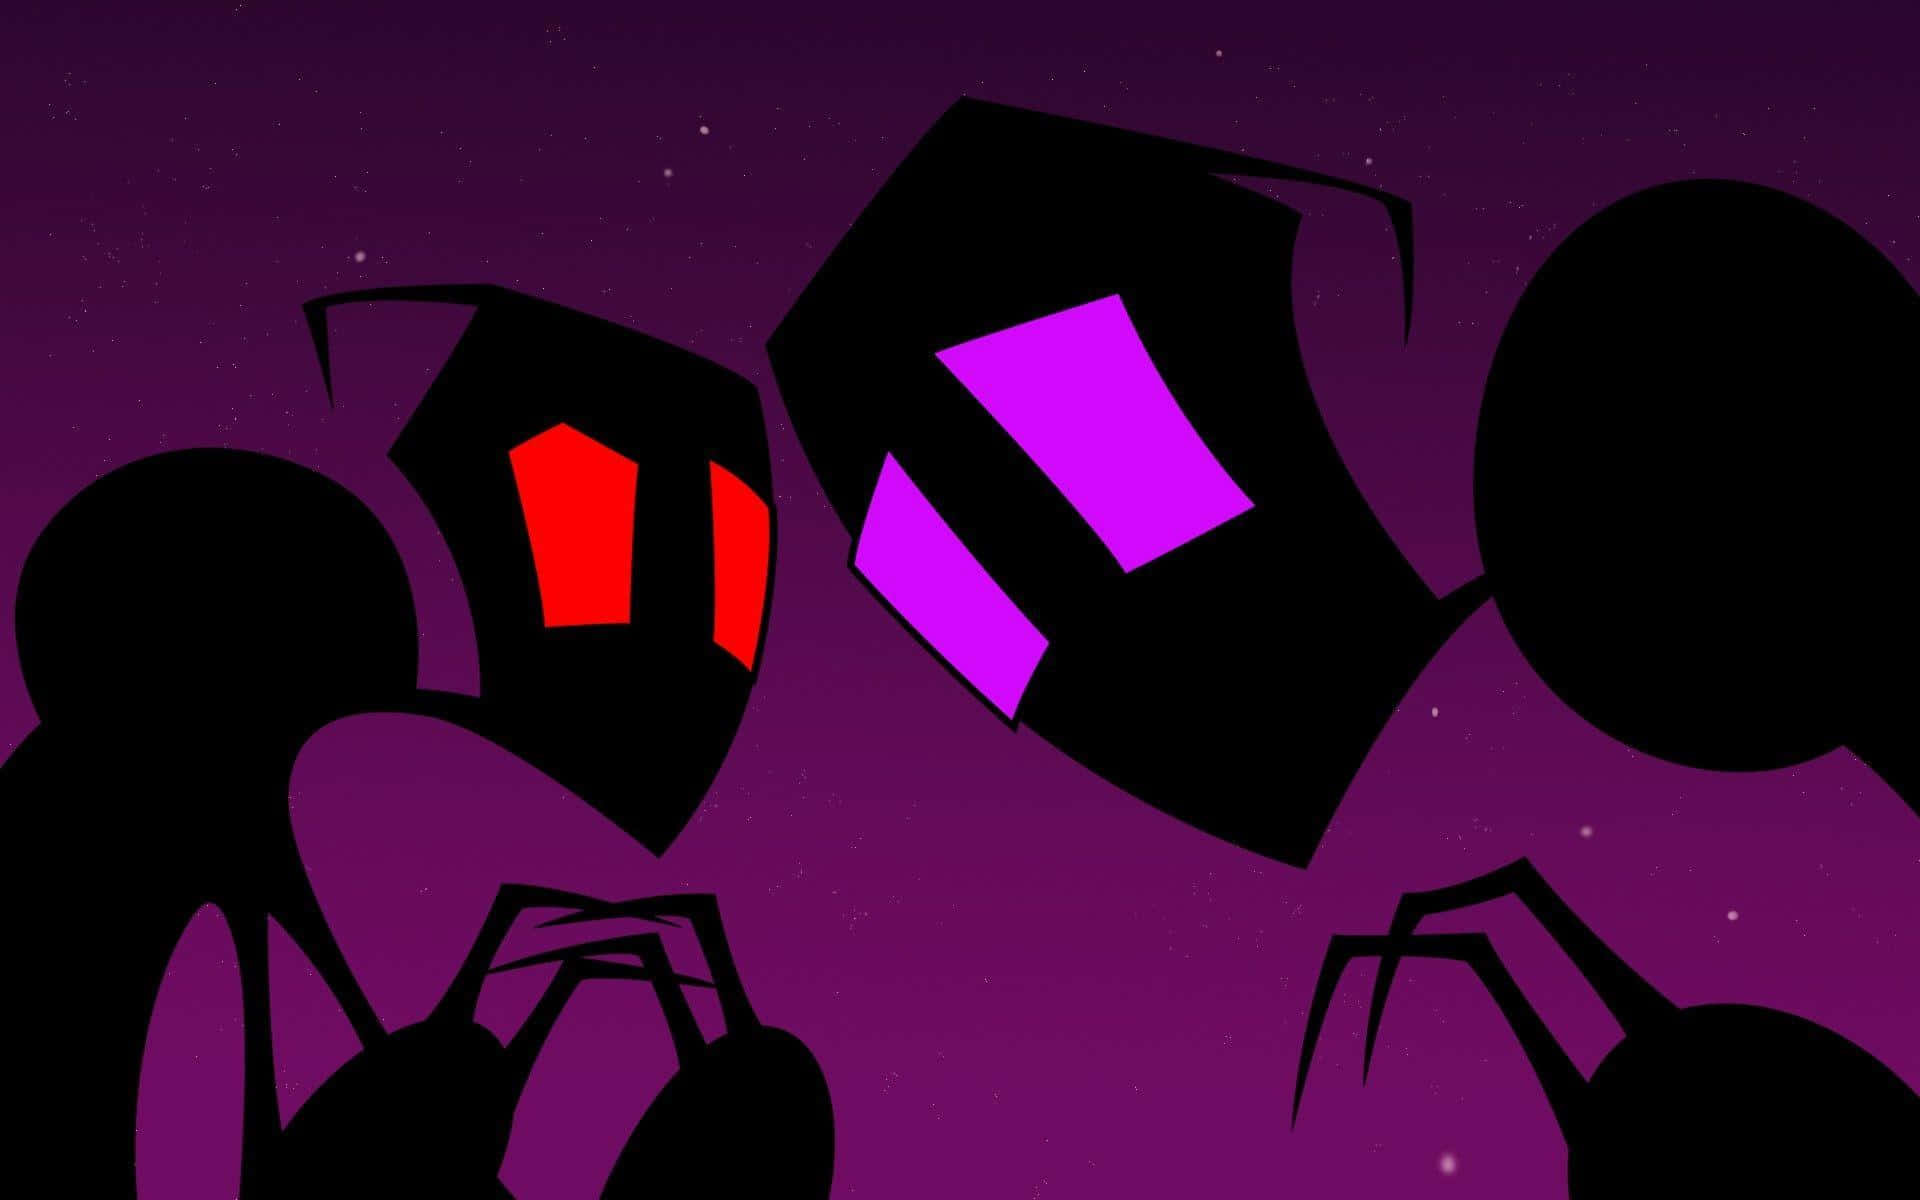 Outsmarting the enemy in Invader Zim